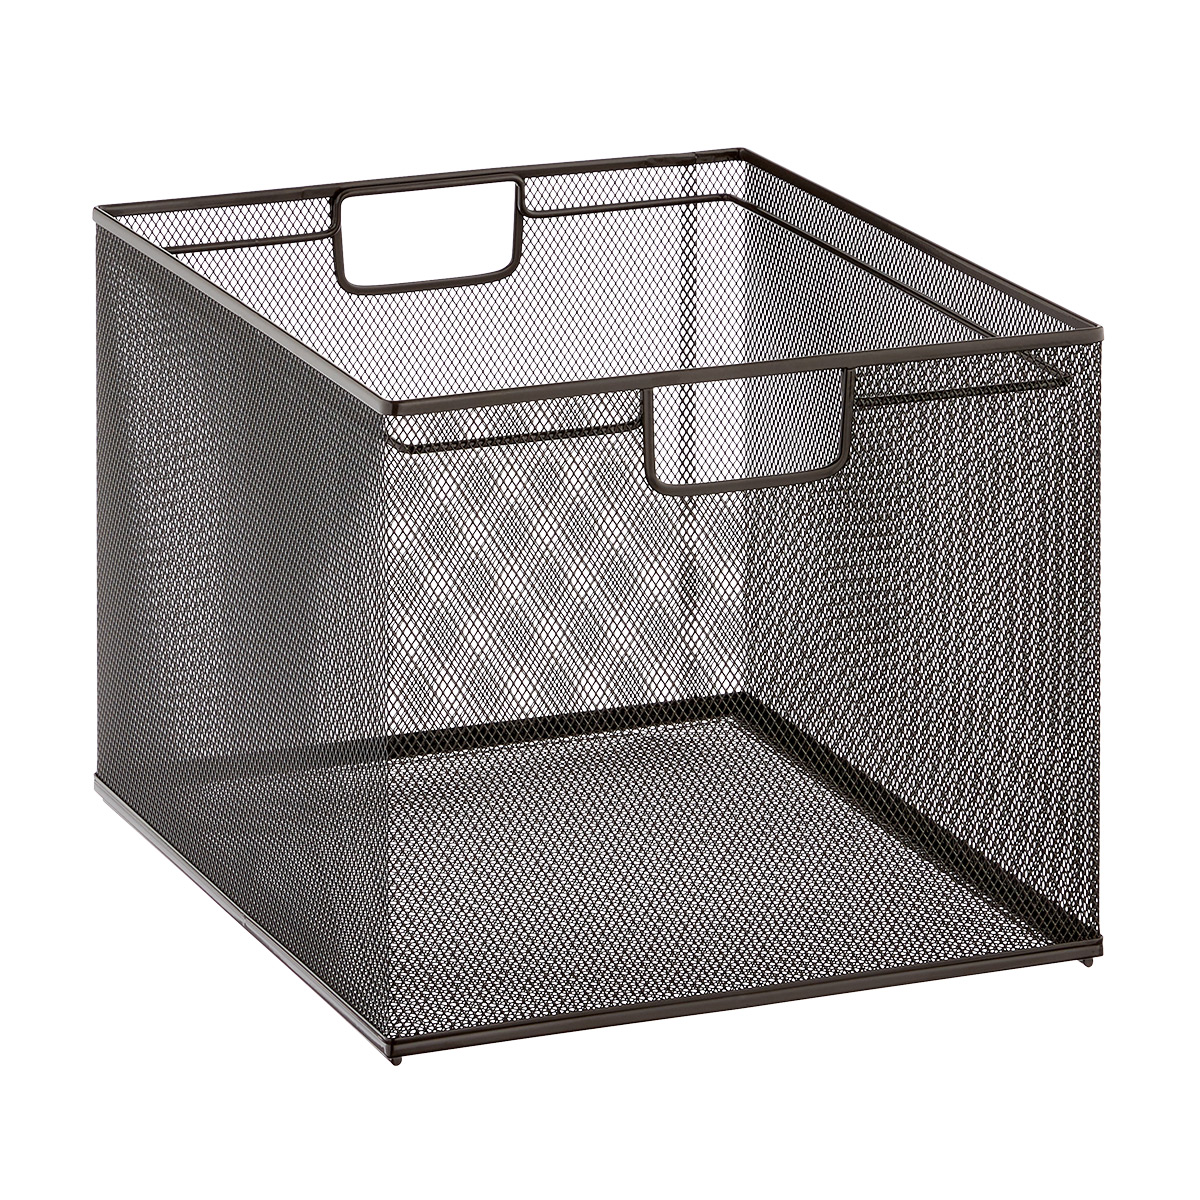 https://www.containerstore.com/catalogimages/448841/10088177_mesh_file_crate_caster_base.jpg